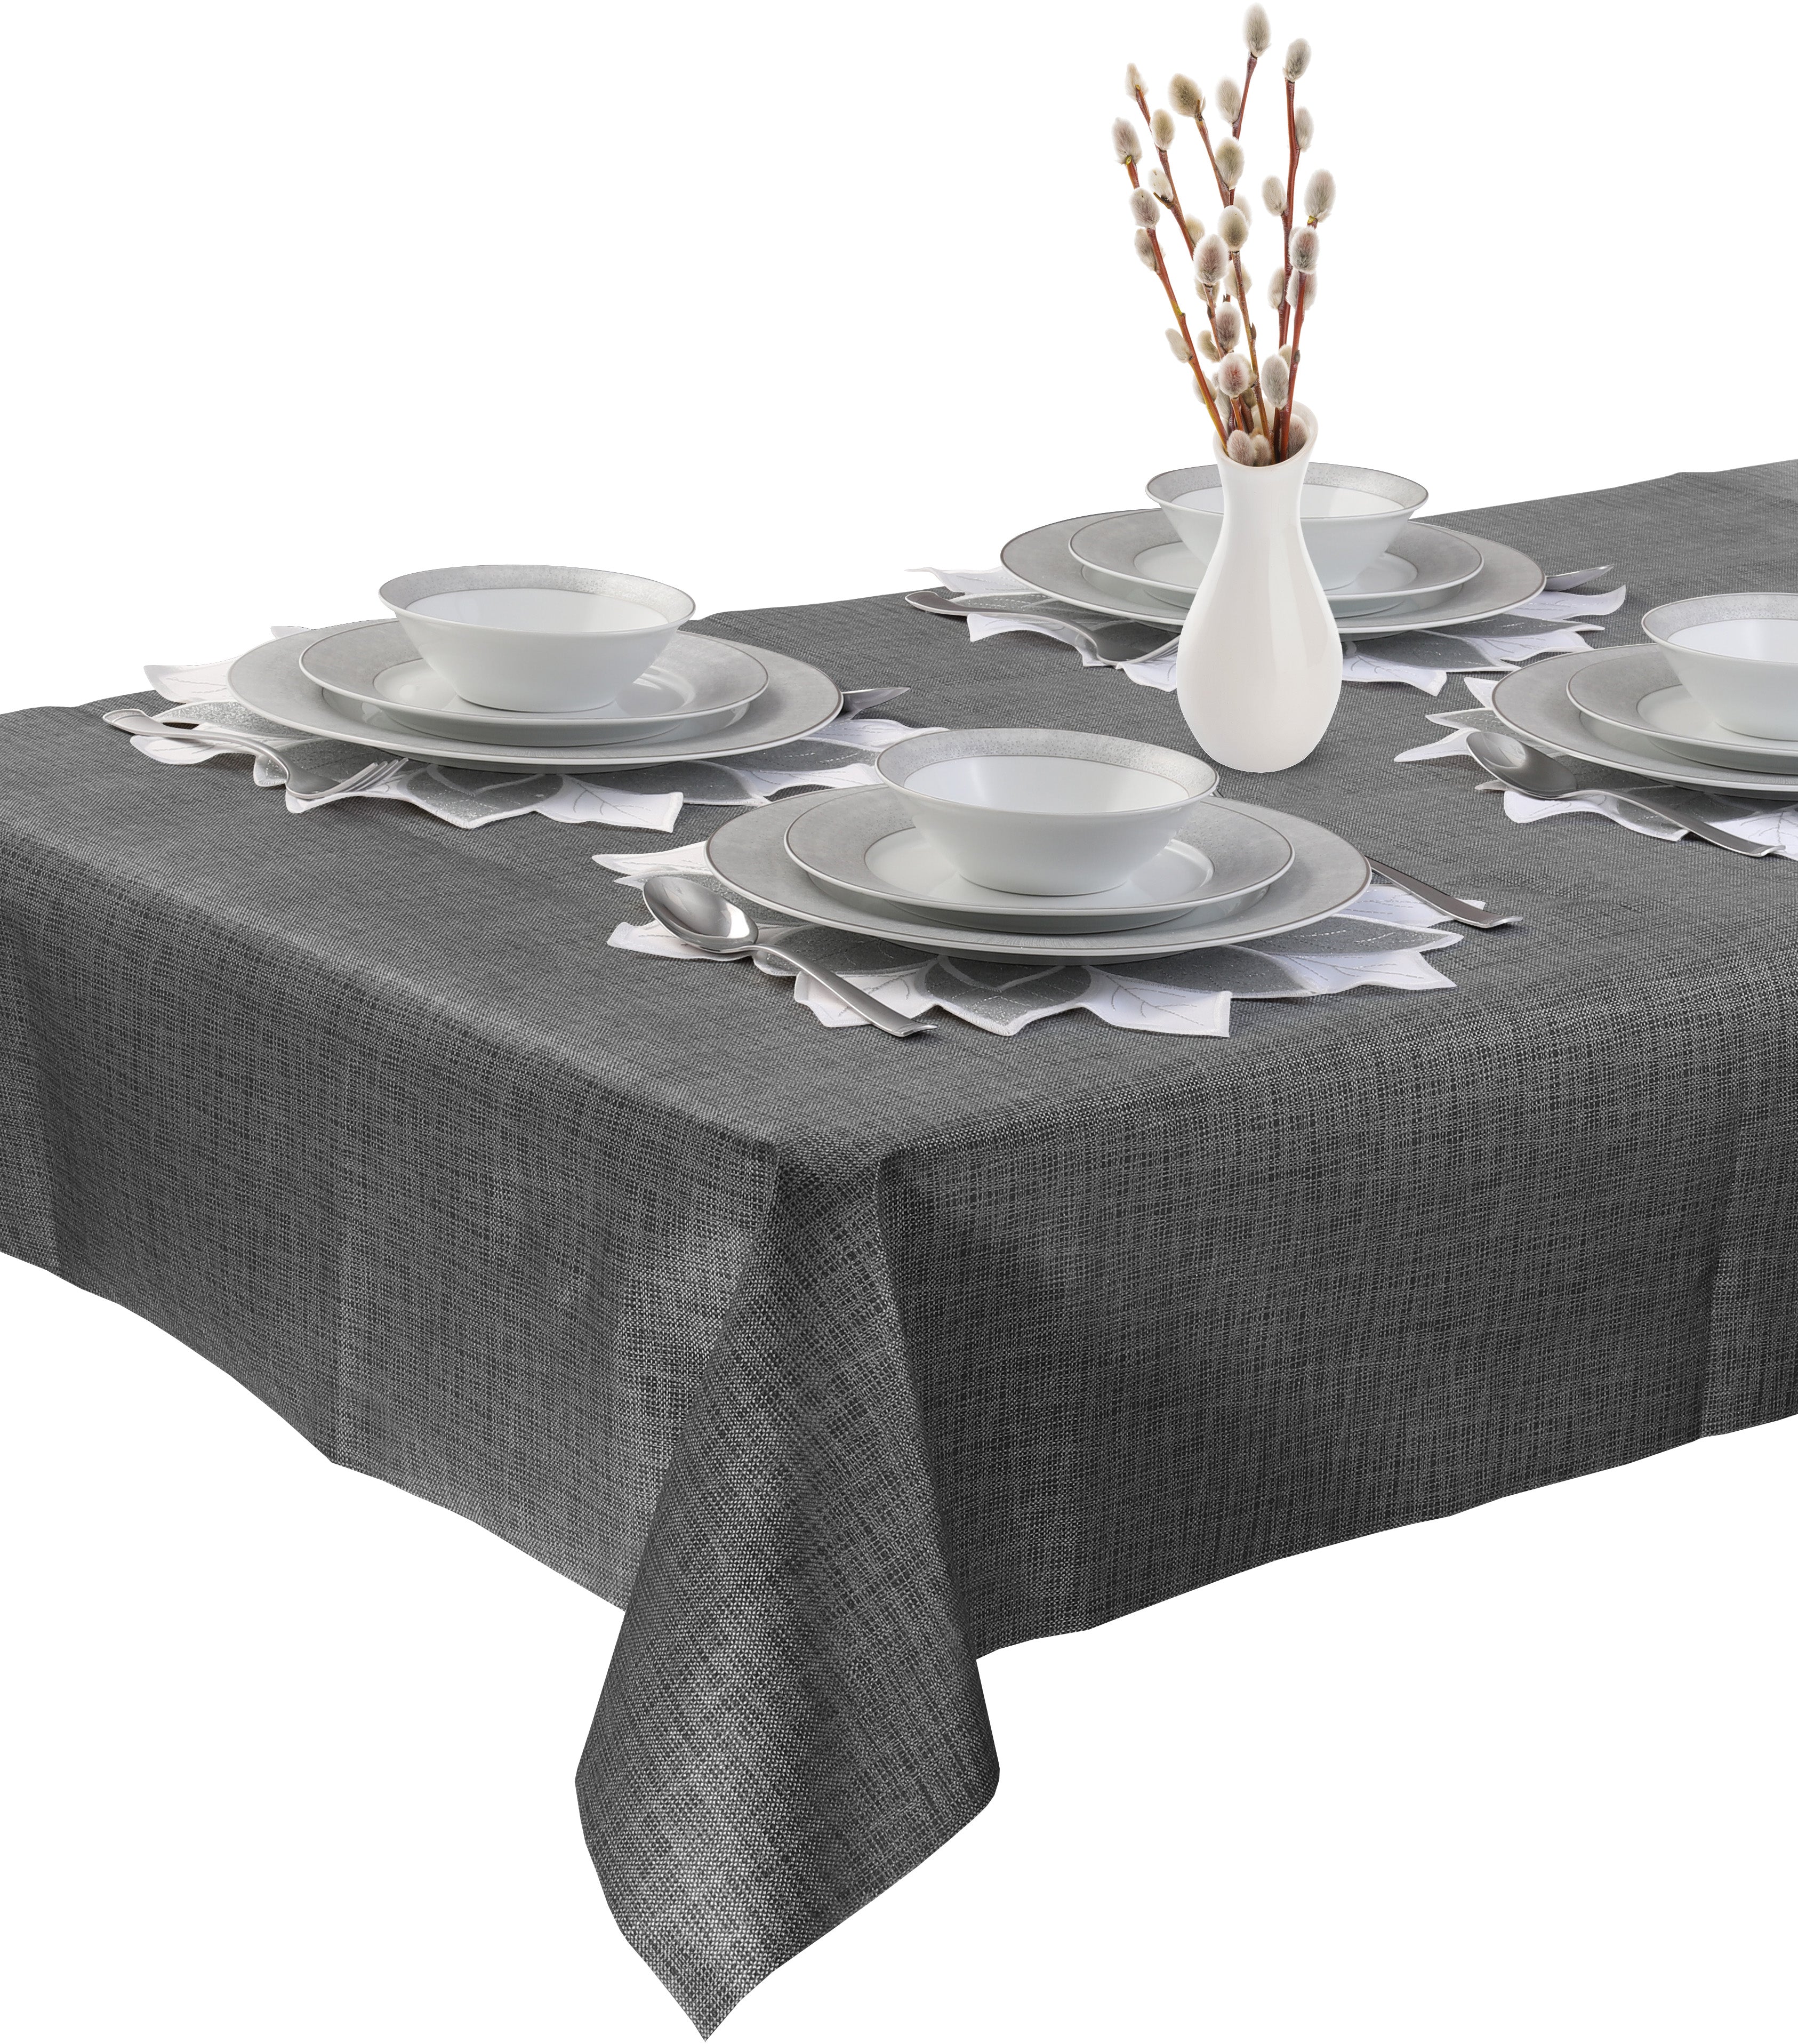 Decorative Tablecloth Waterproof Non-Woven Fabric 54"W x 108"L Rectangle, Flower White/Silver, Disposable yet Reusable